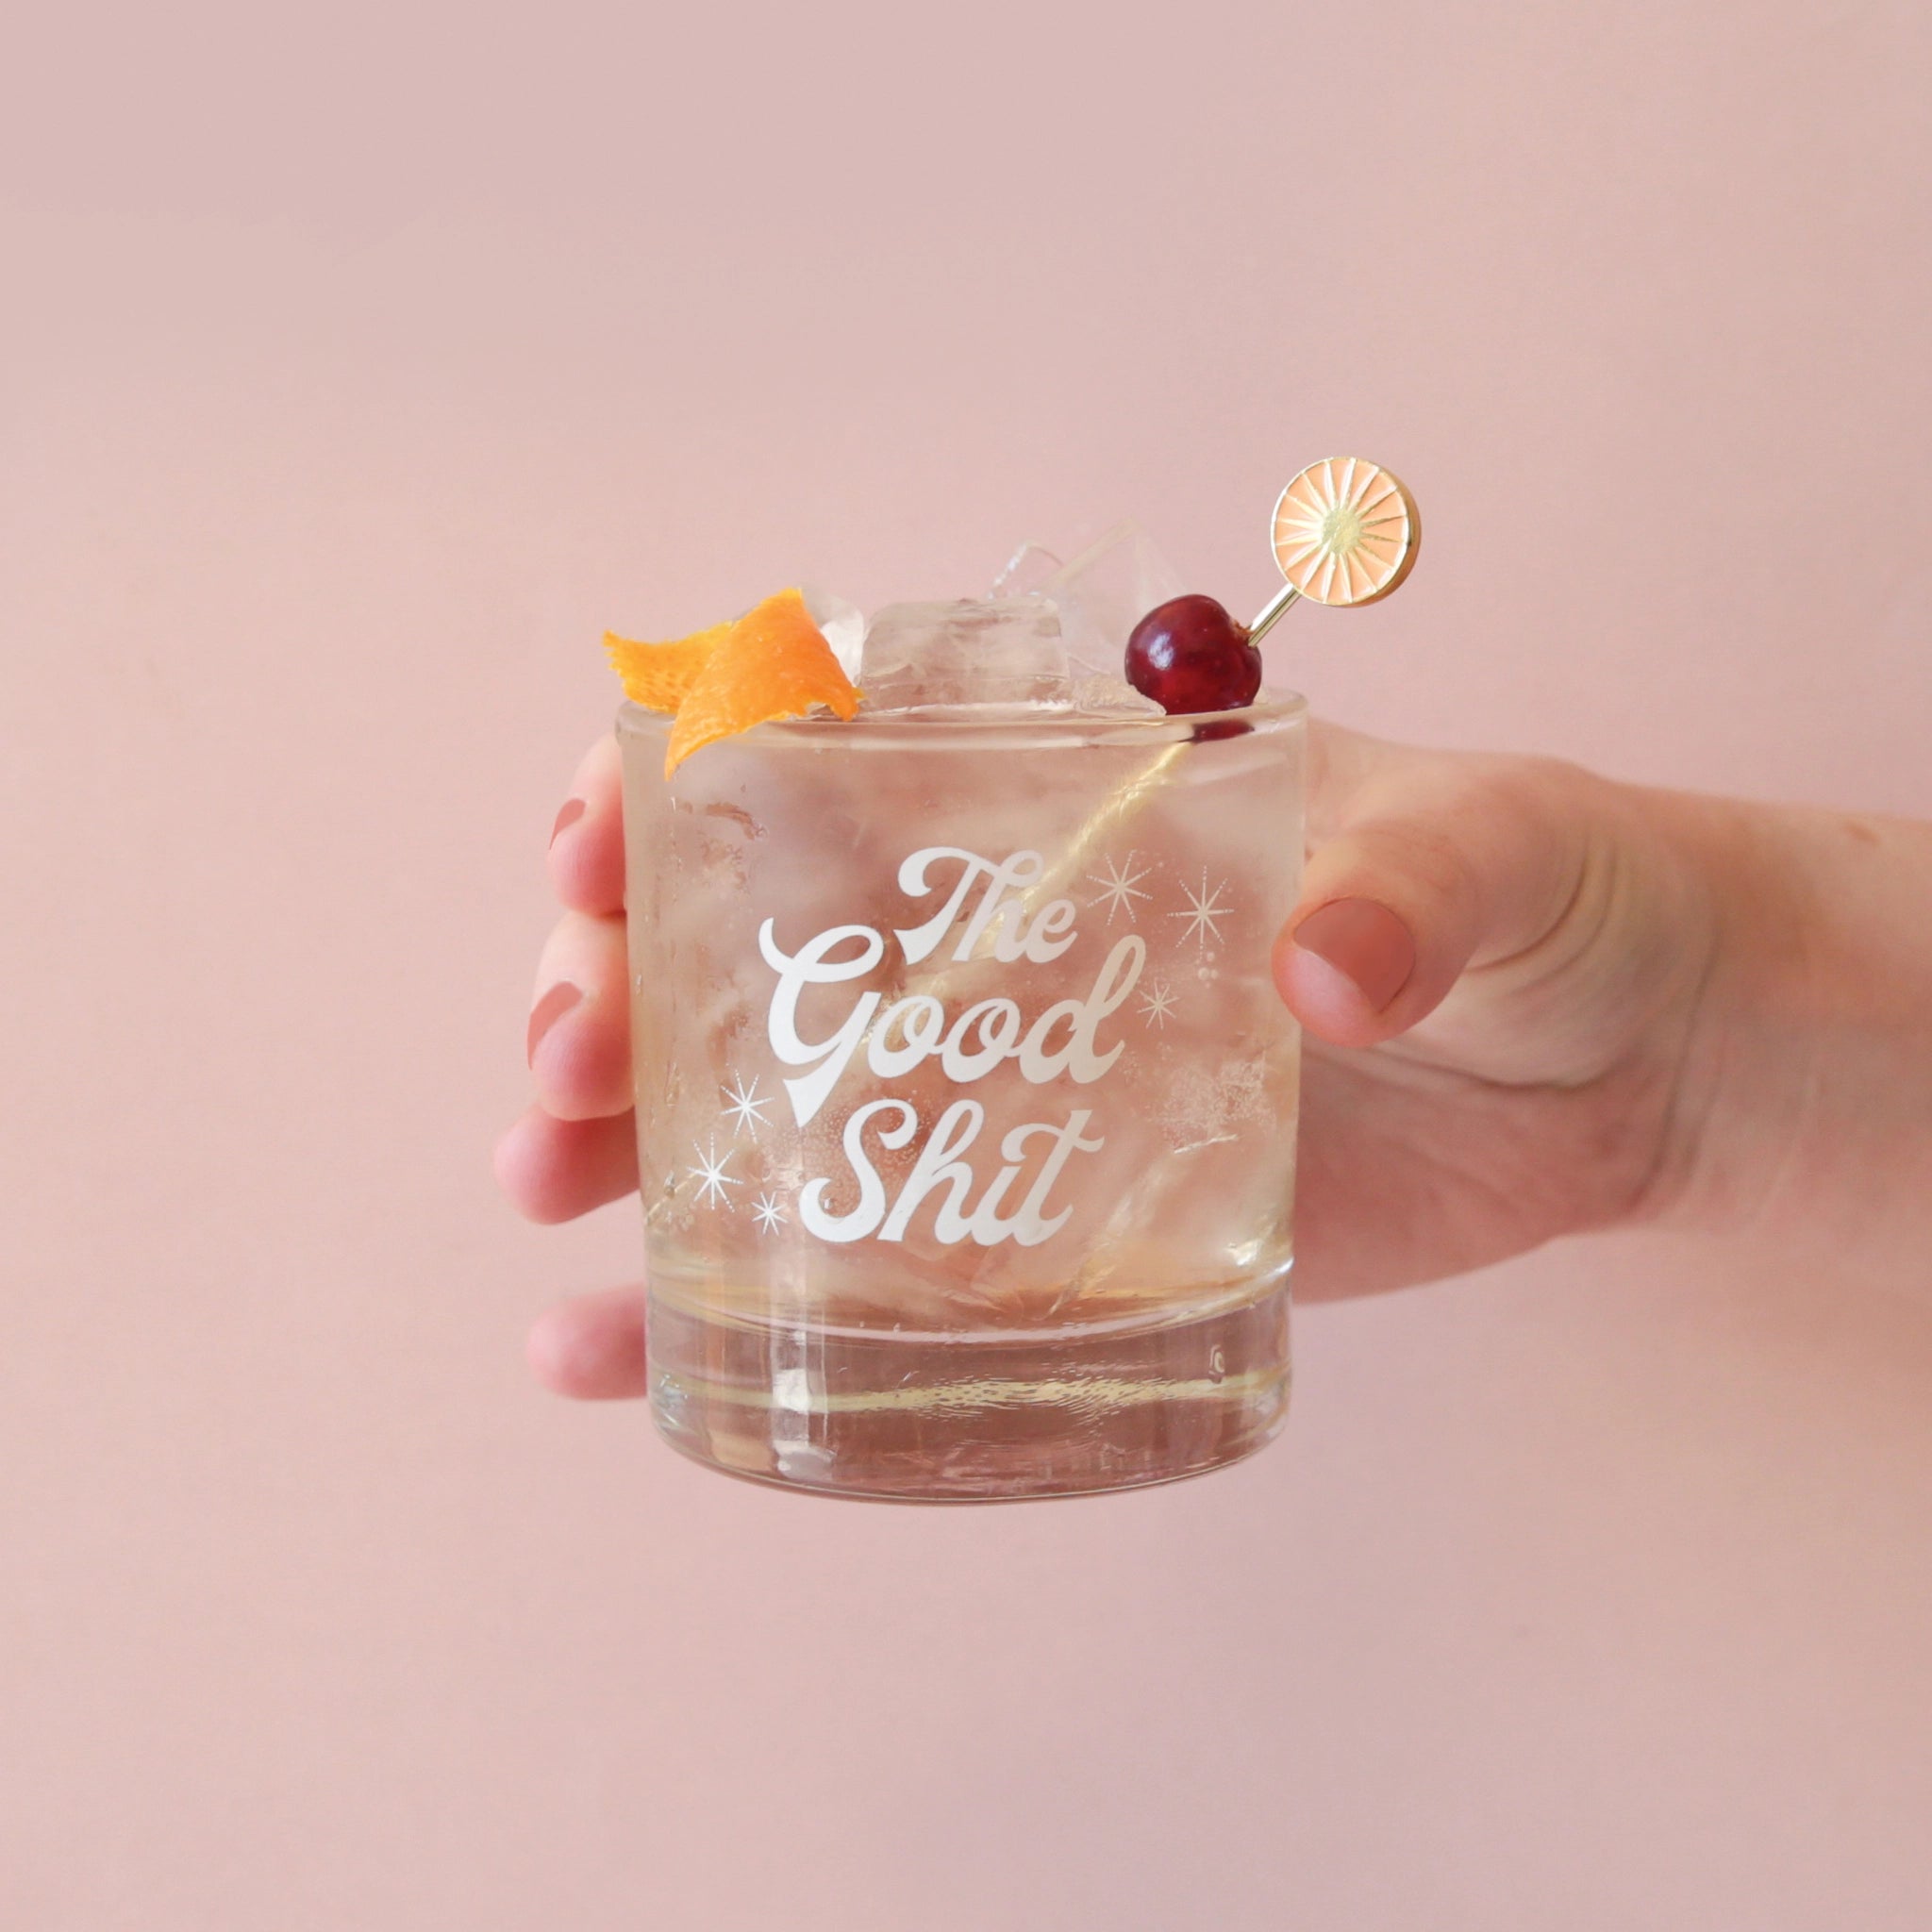 Against a peachy pink background is a photograph of a short glass tumbler with a thick bottom and &quot;The Good Shit&quot; printed across the center in white groovy cursive text staged here with a cocktail pick along with a cranberry and orange peel garnish.